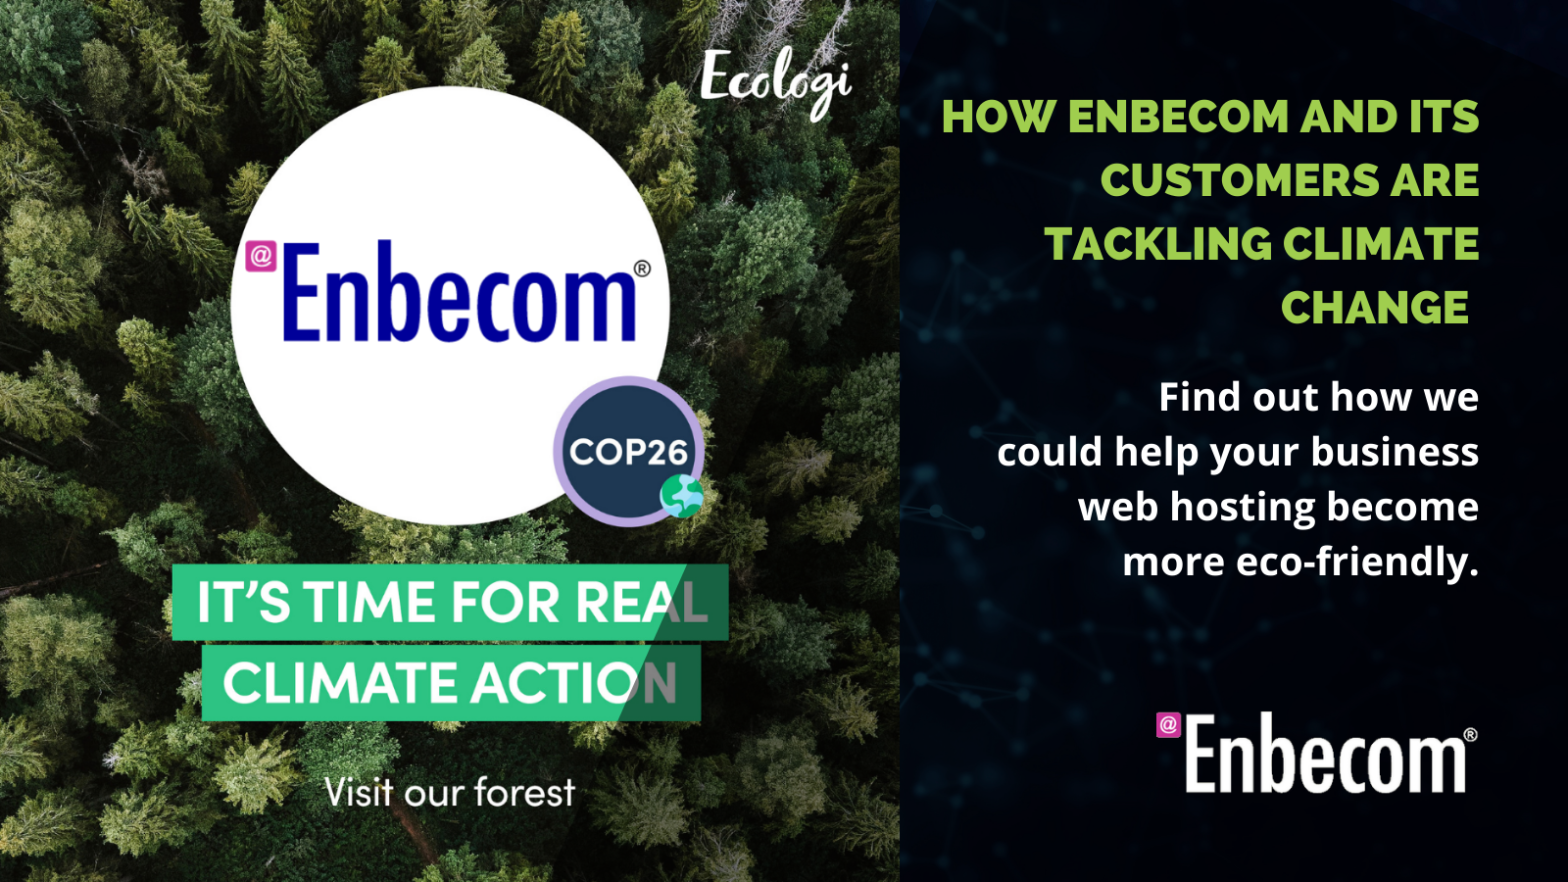 How Enbecom and its customers are tackling climate change